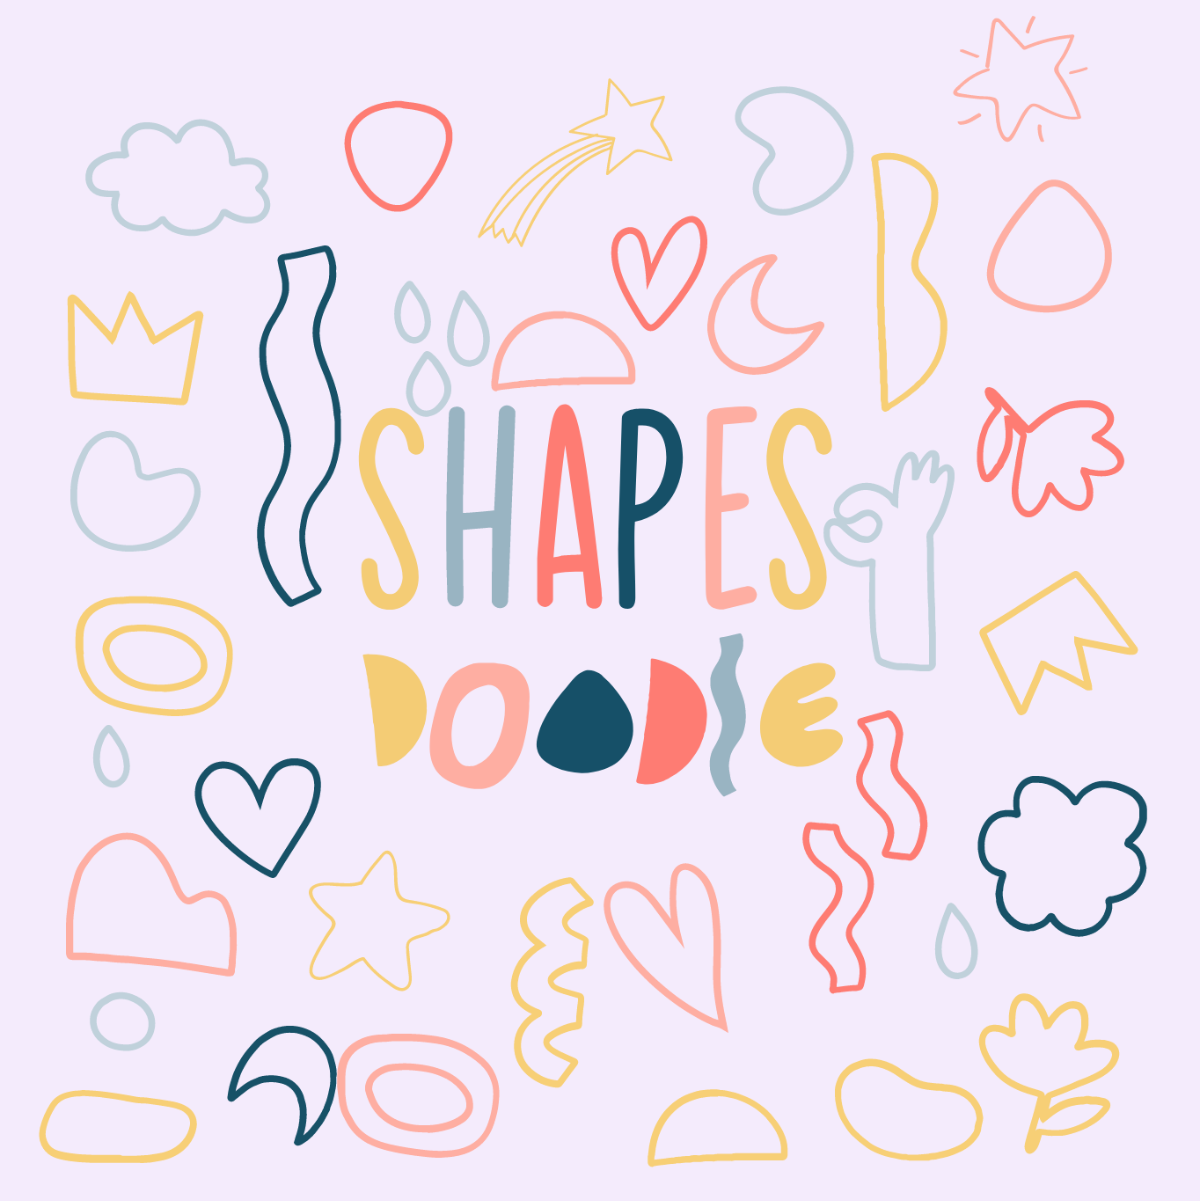 Free Doodle Shapes Vector Template